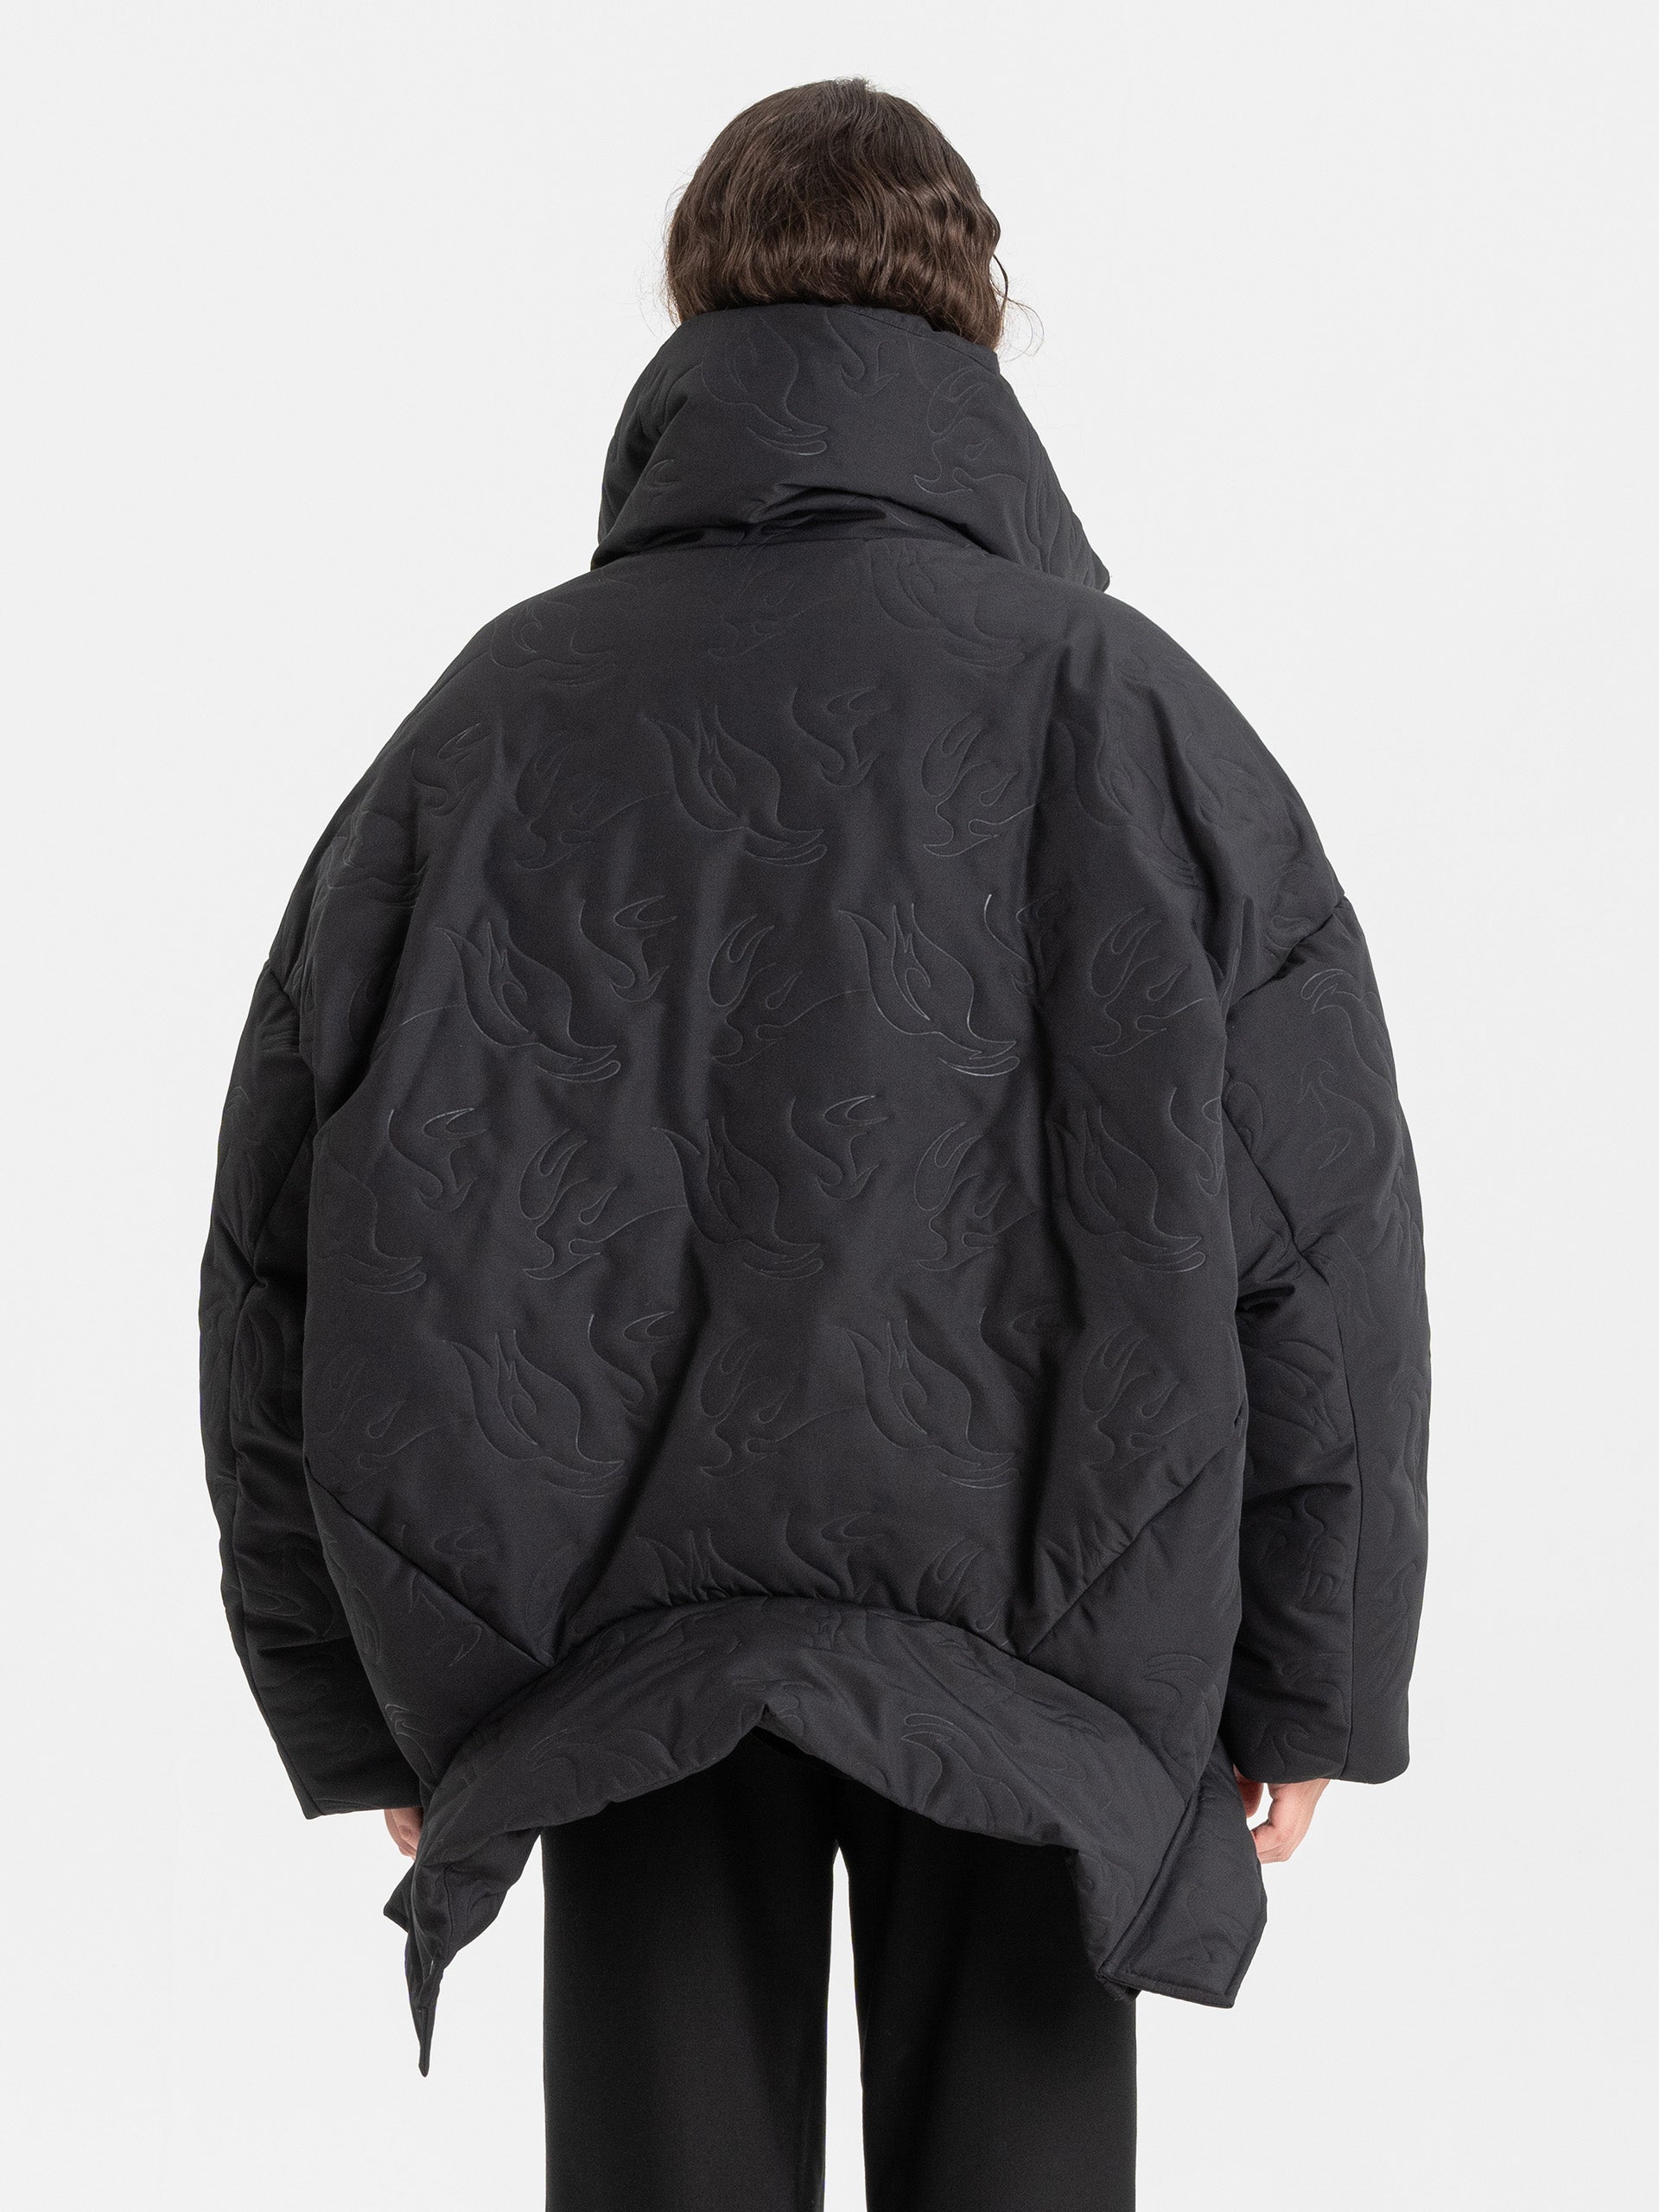 UPSIDE DOWN JACKET IN QUILTED PHOENIX